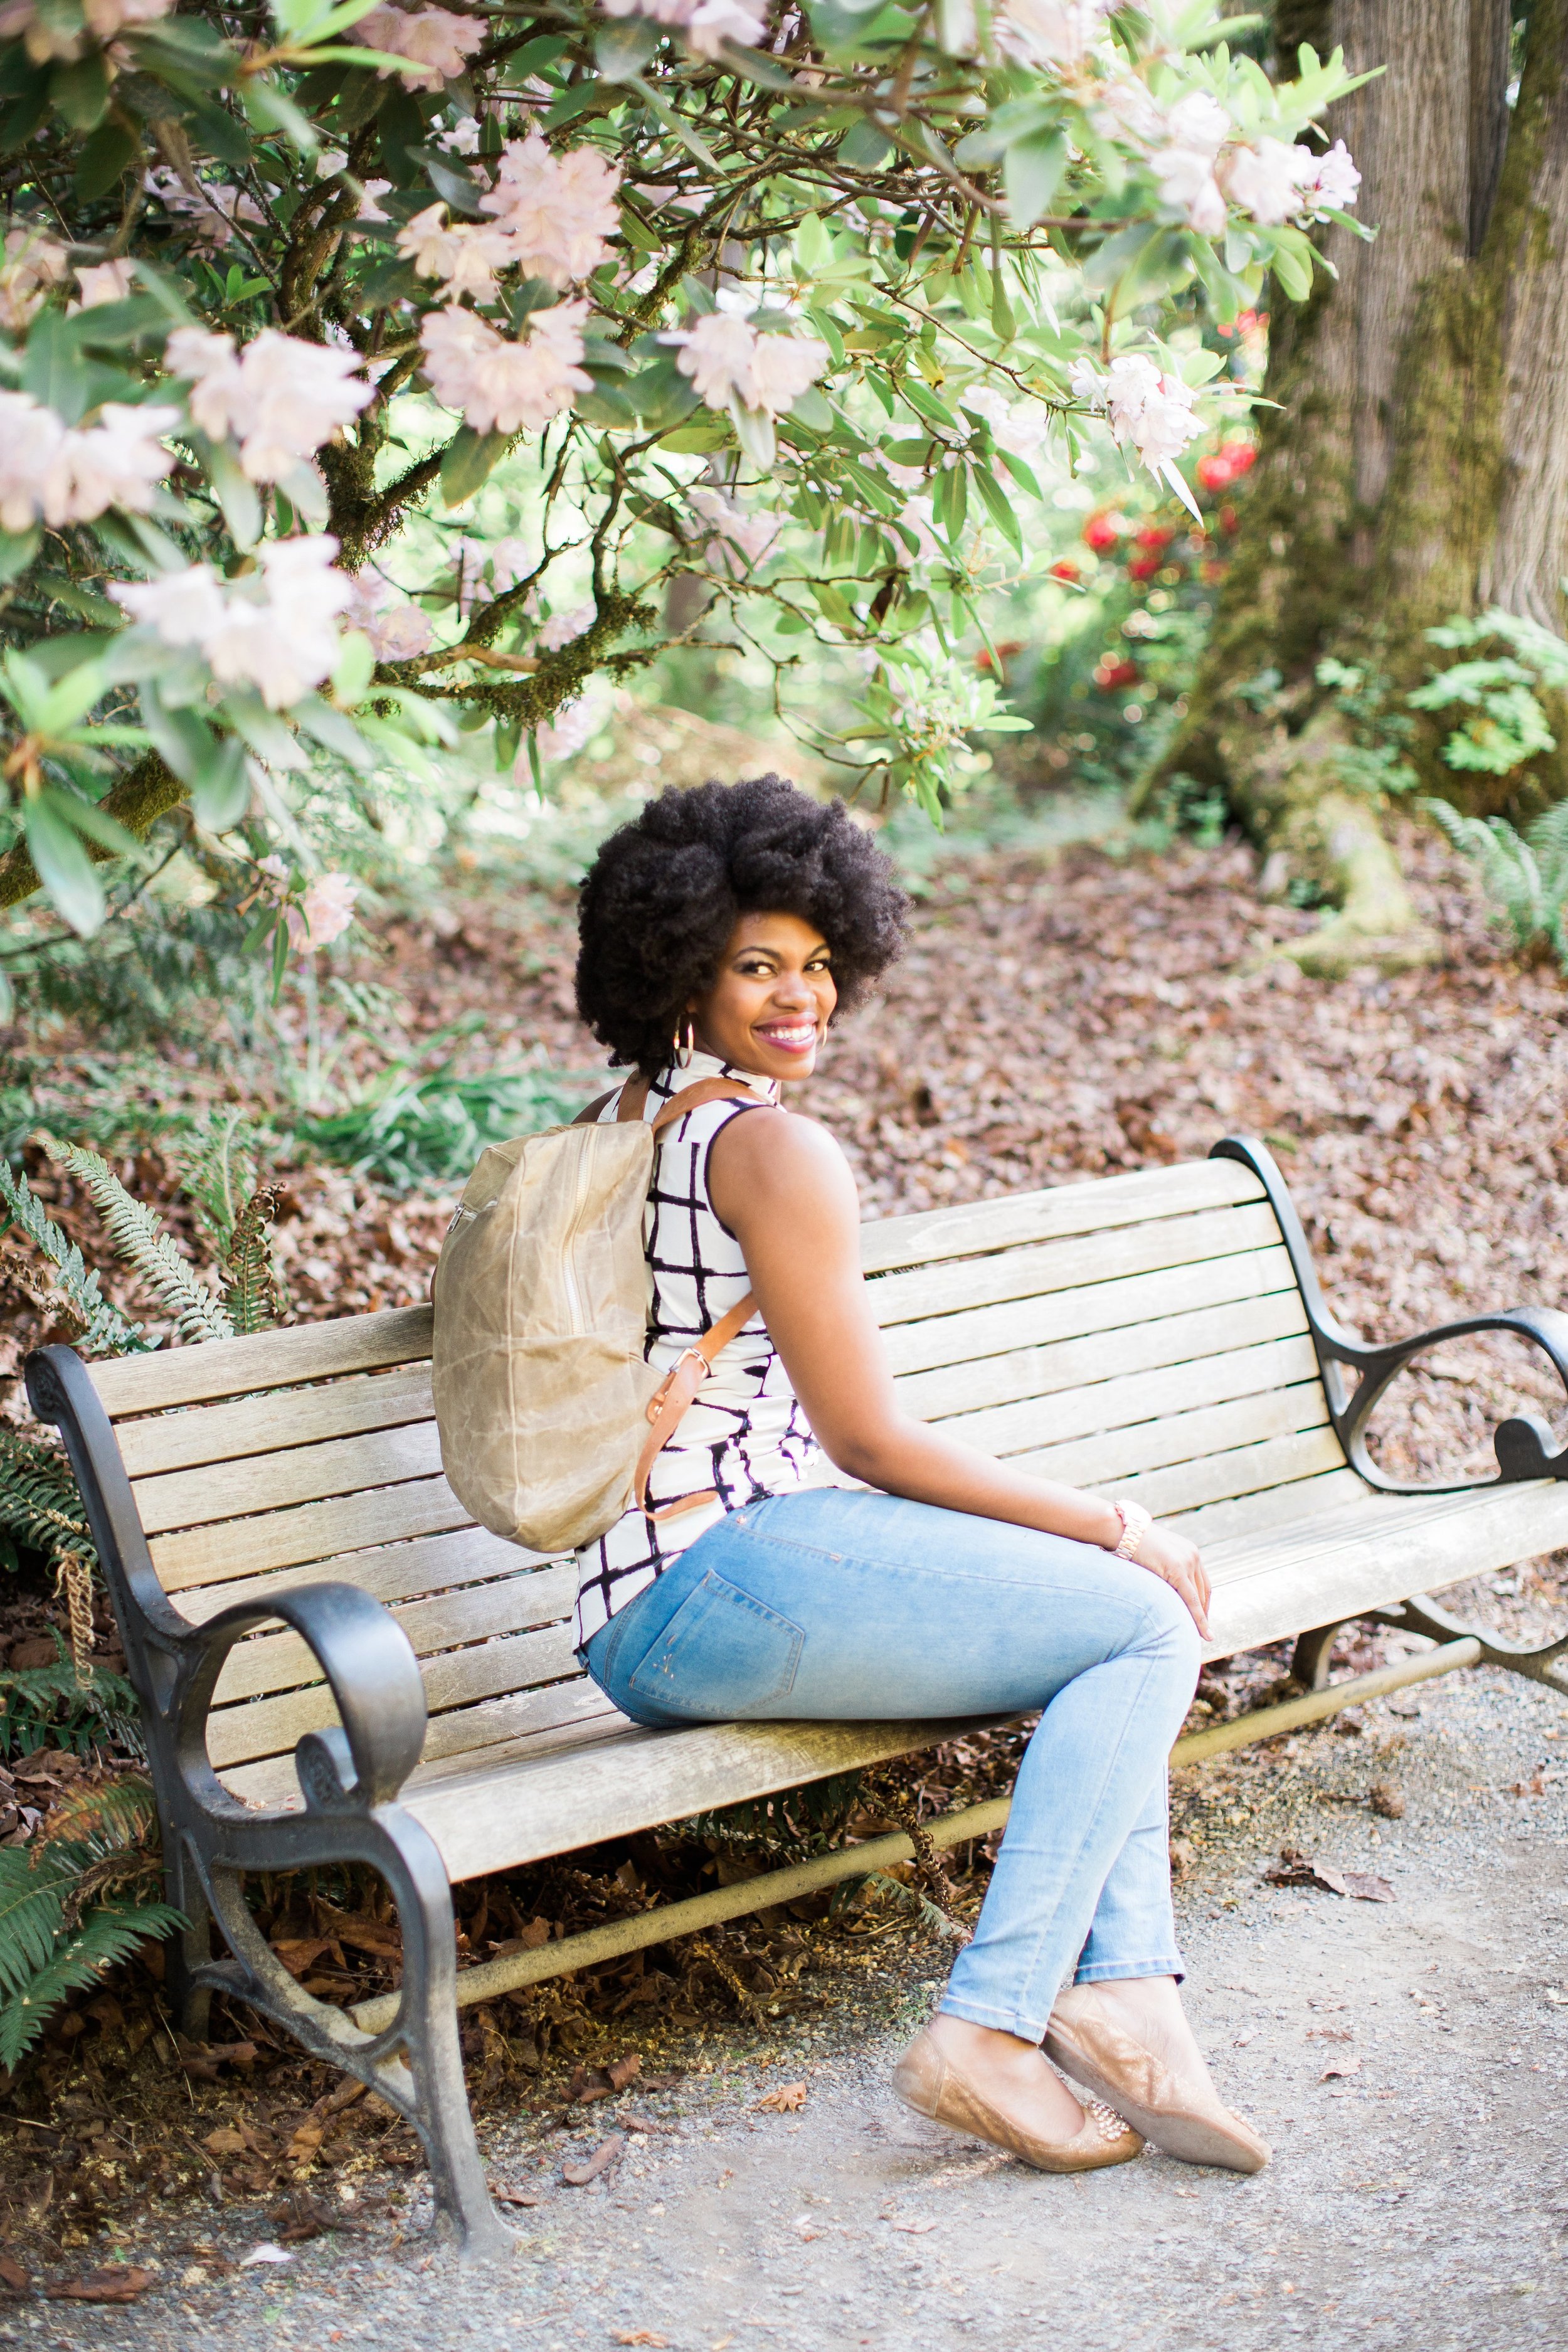 Business Branding Session for nonprofit fair-trade fashion company Sathi by Freeset USA photographed by Bellevue WA photographer Janelle Elaine Photography at Bellevue Botanical Gardens.jpg